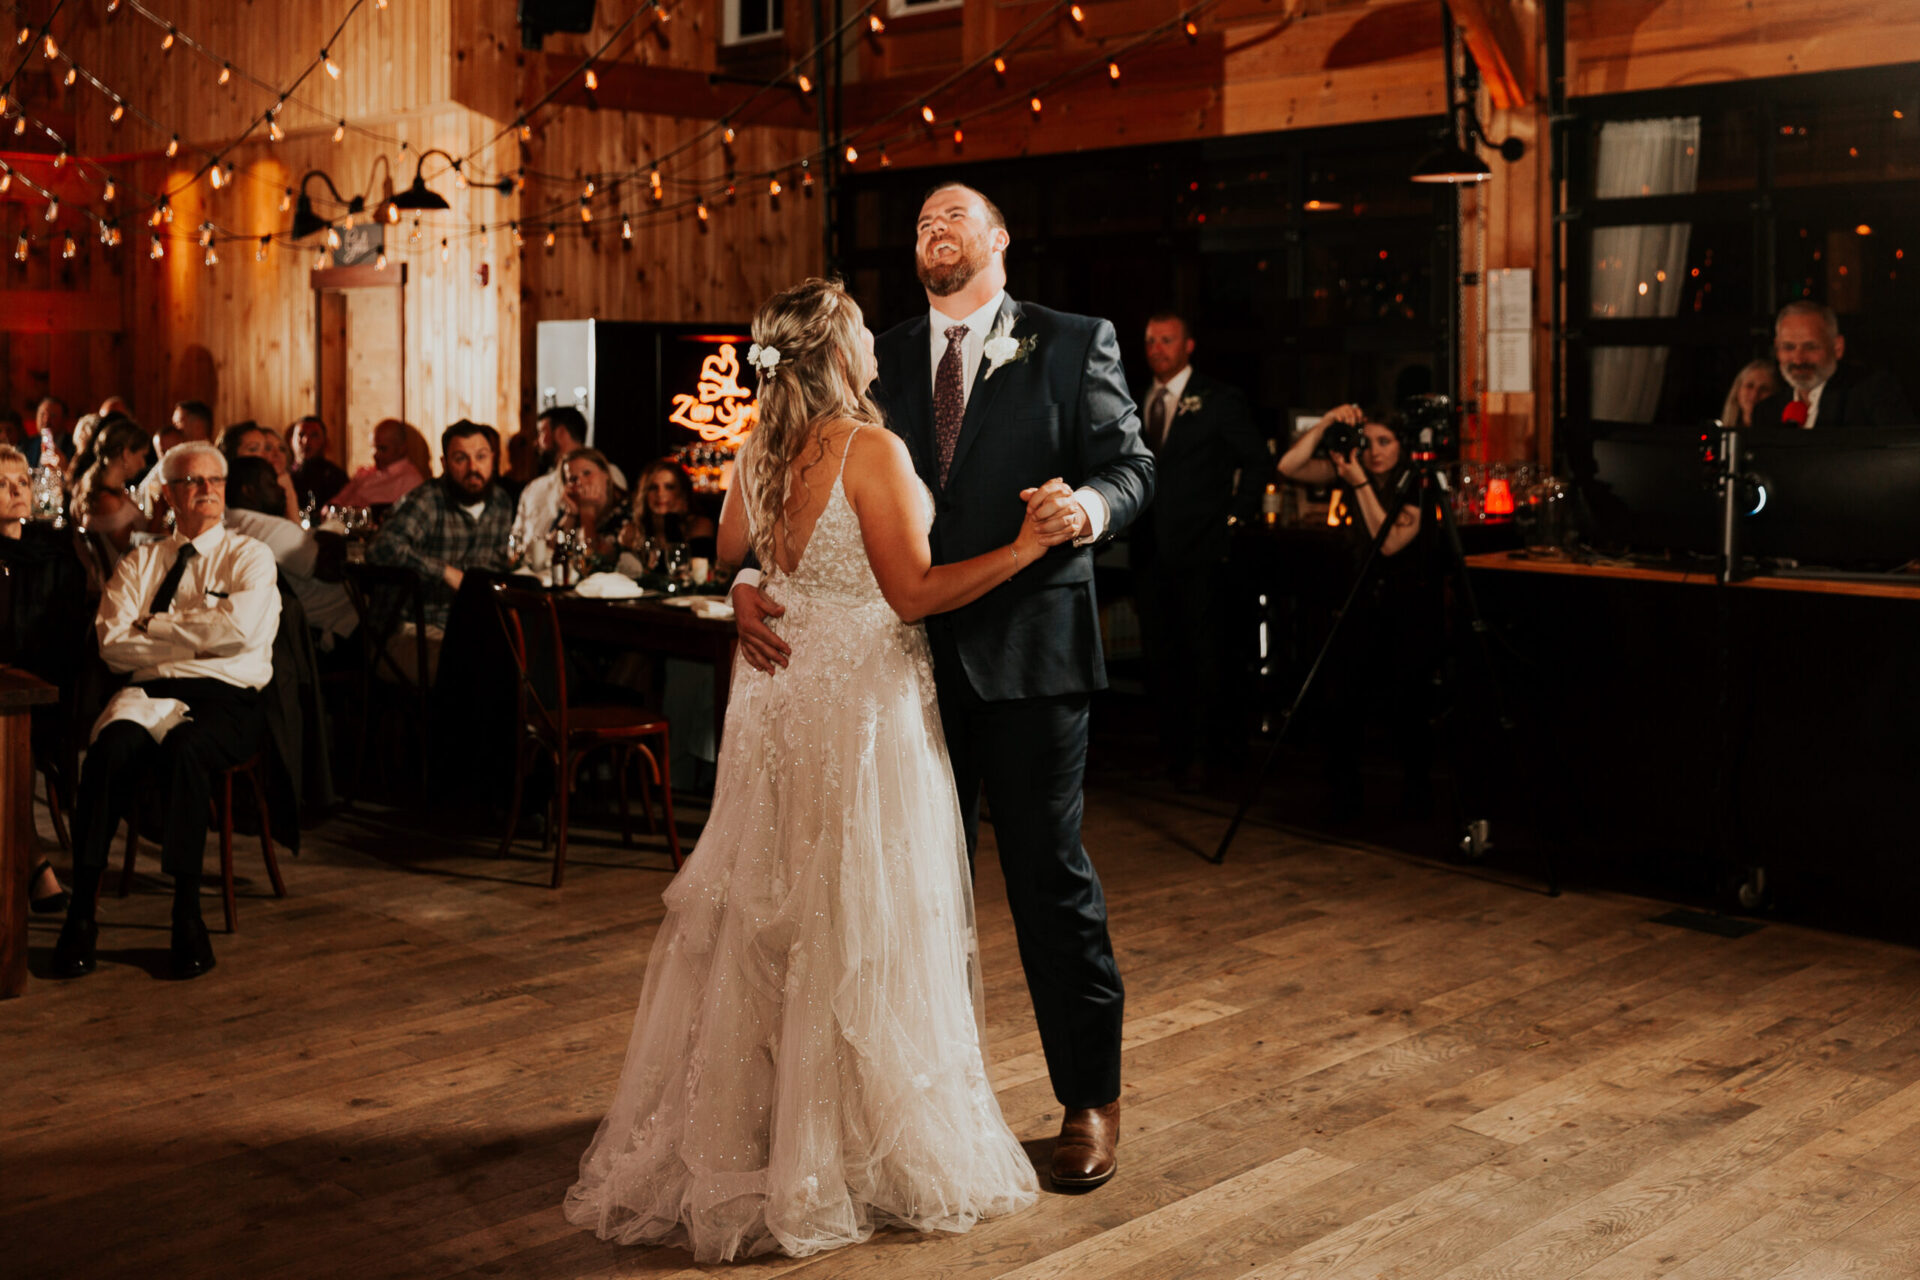 Zion Springs bride and groom first dance